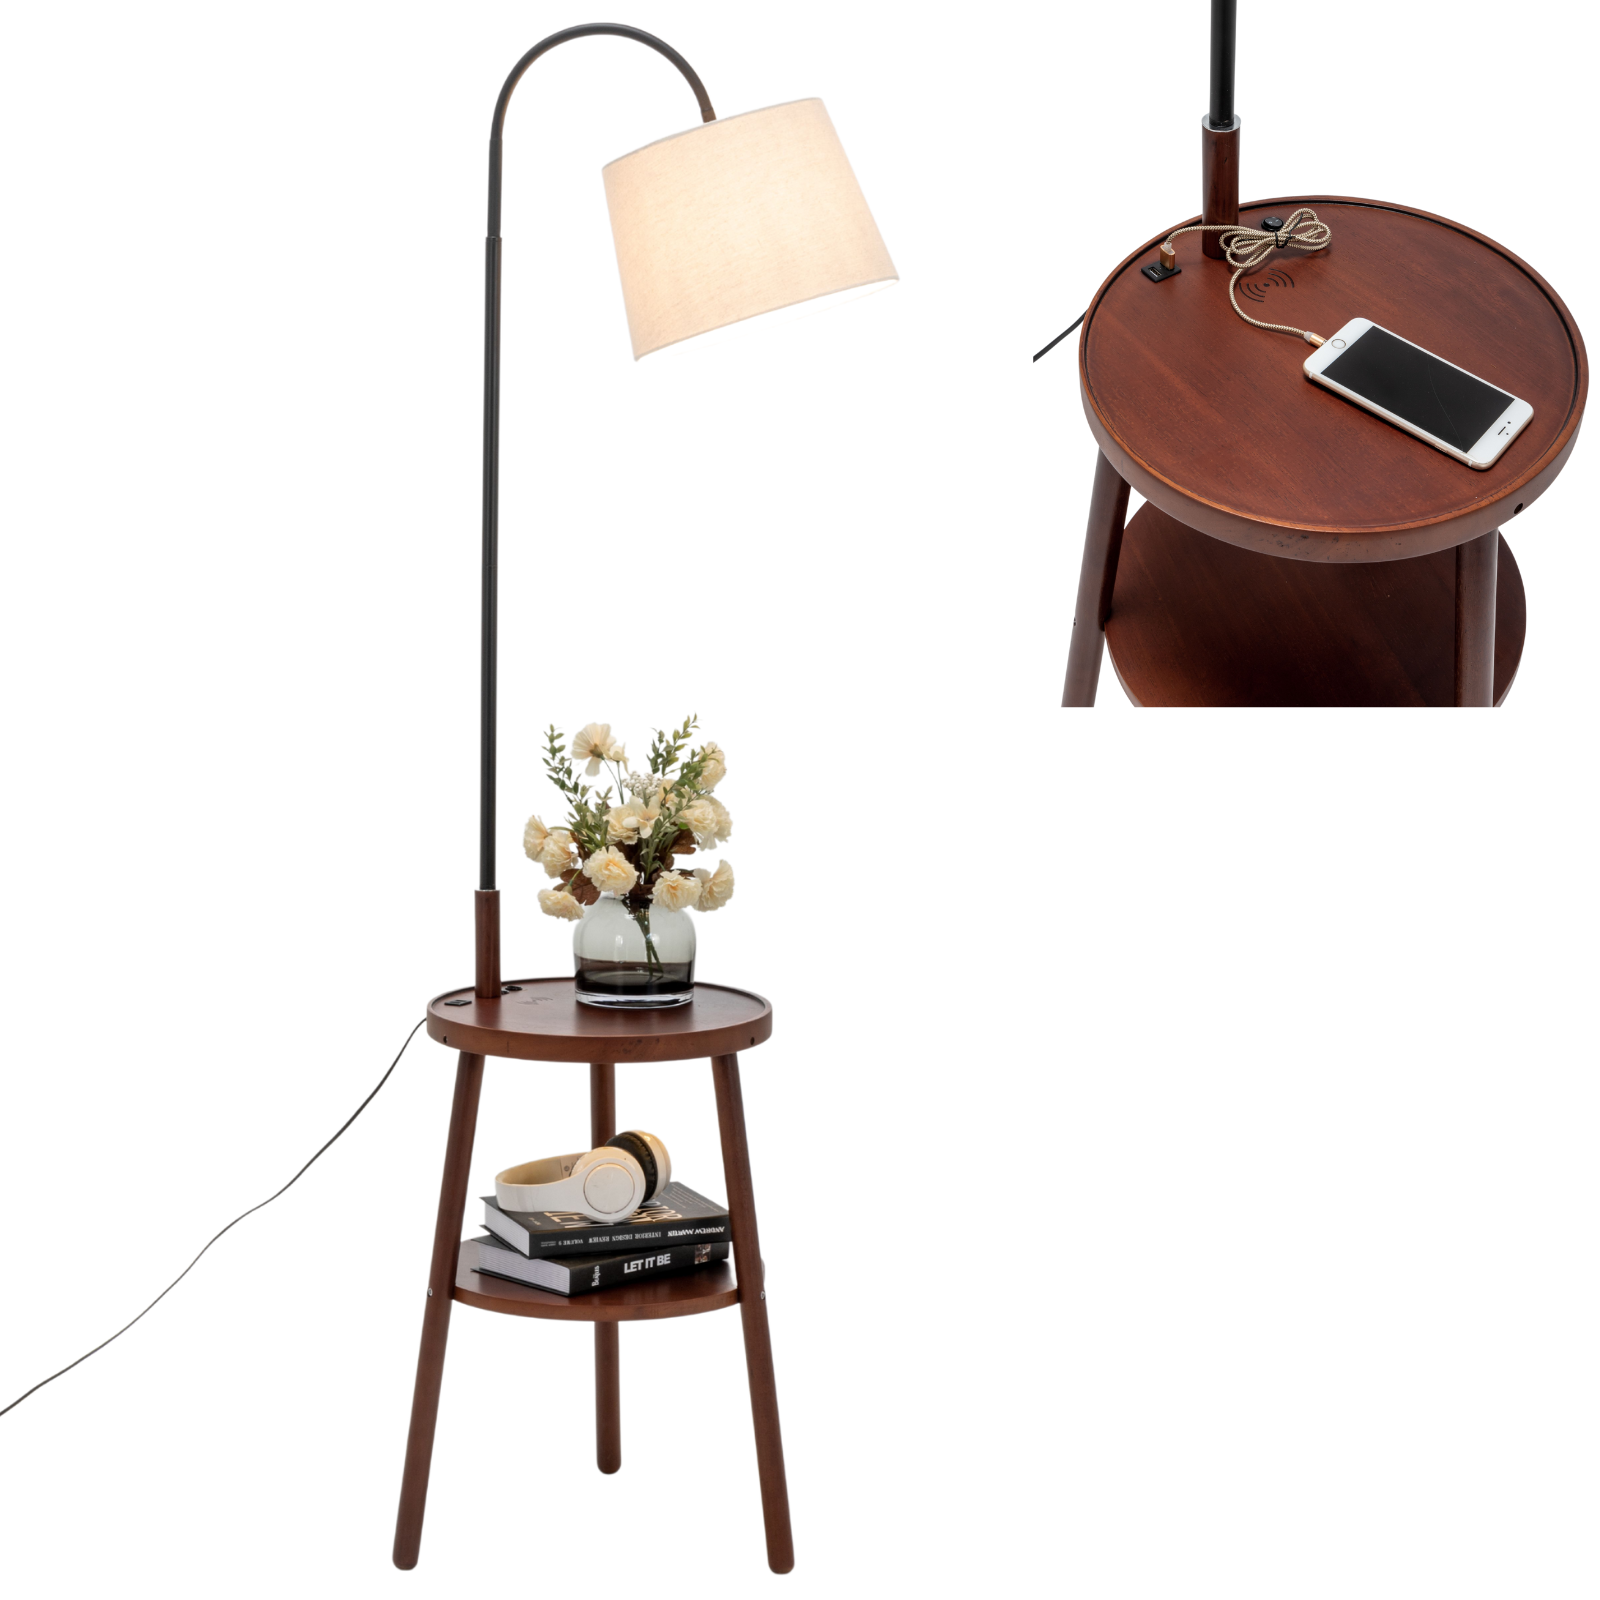 Naples Tripod Floor Lamp Shelf Storage Drawer Bed Side Table Light w/ USB Charger